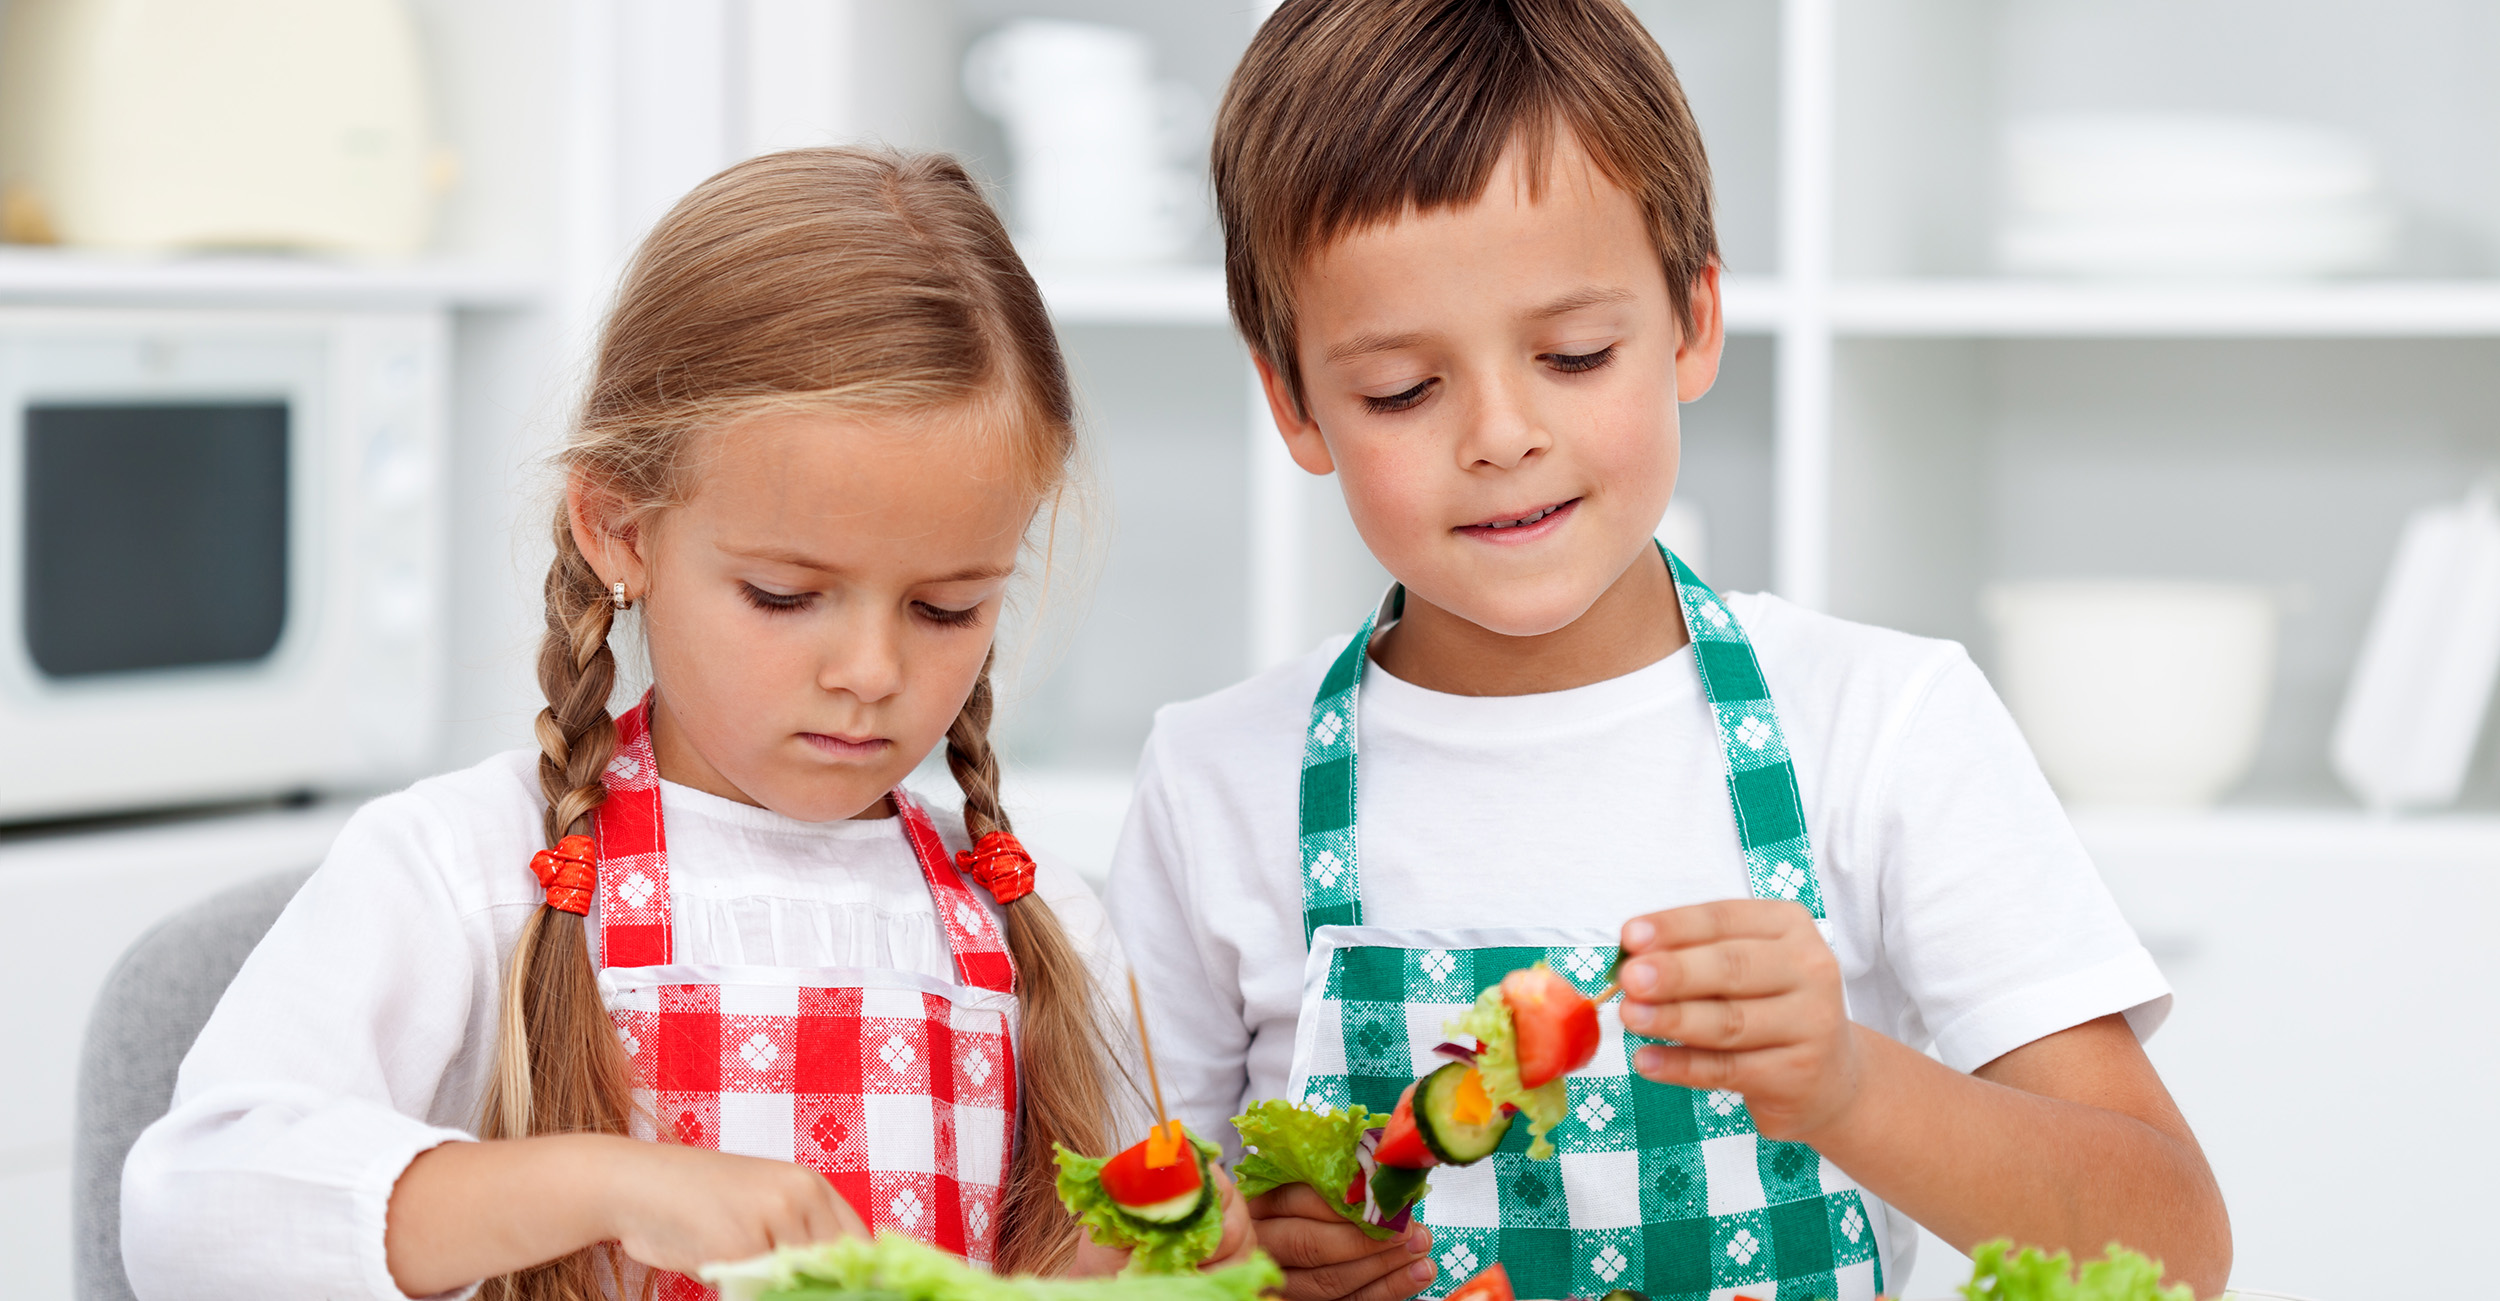 Kids in the Kitchen Improves Eating Habits